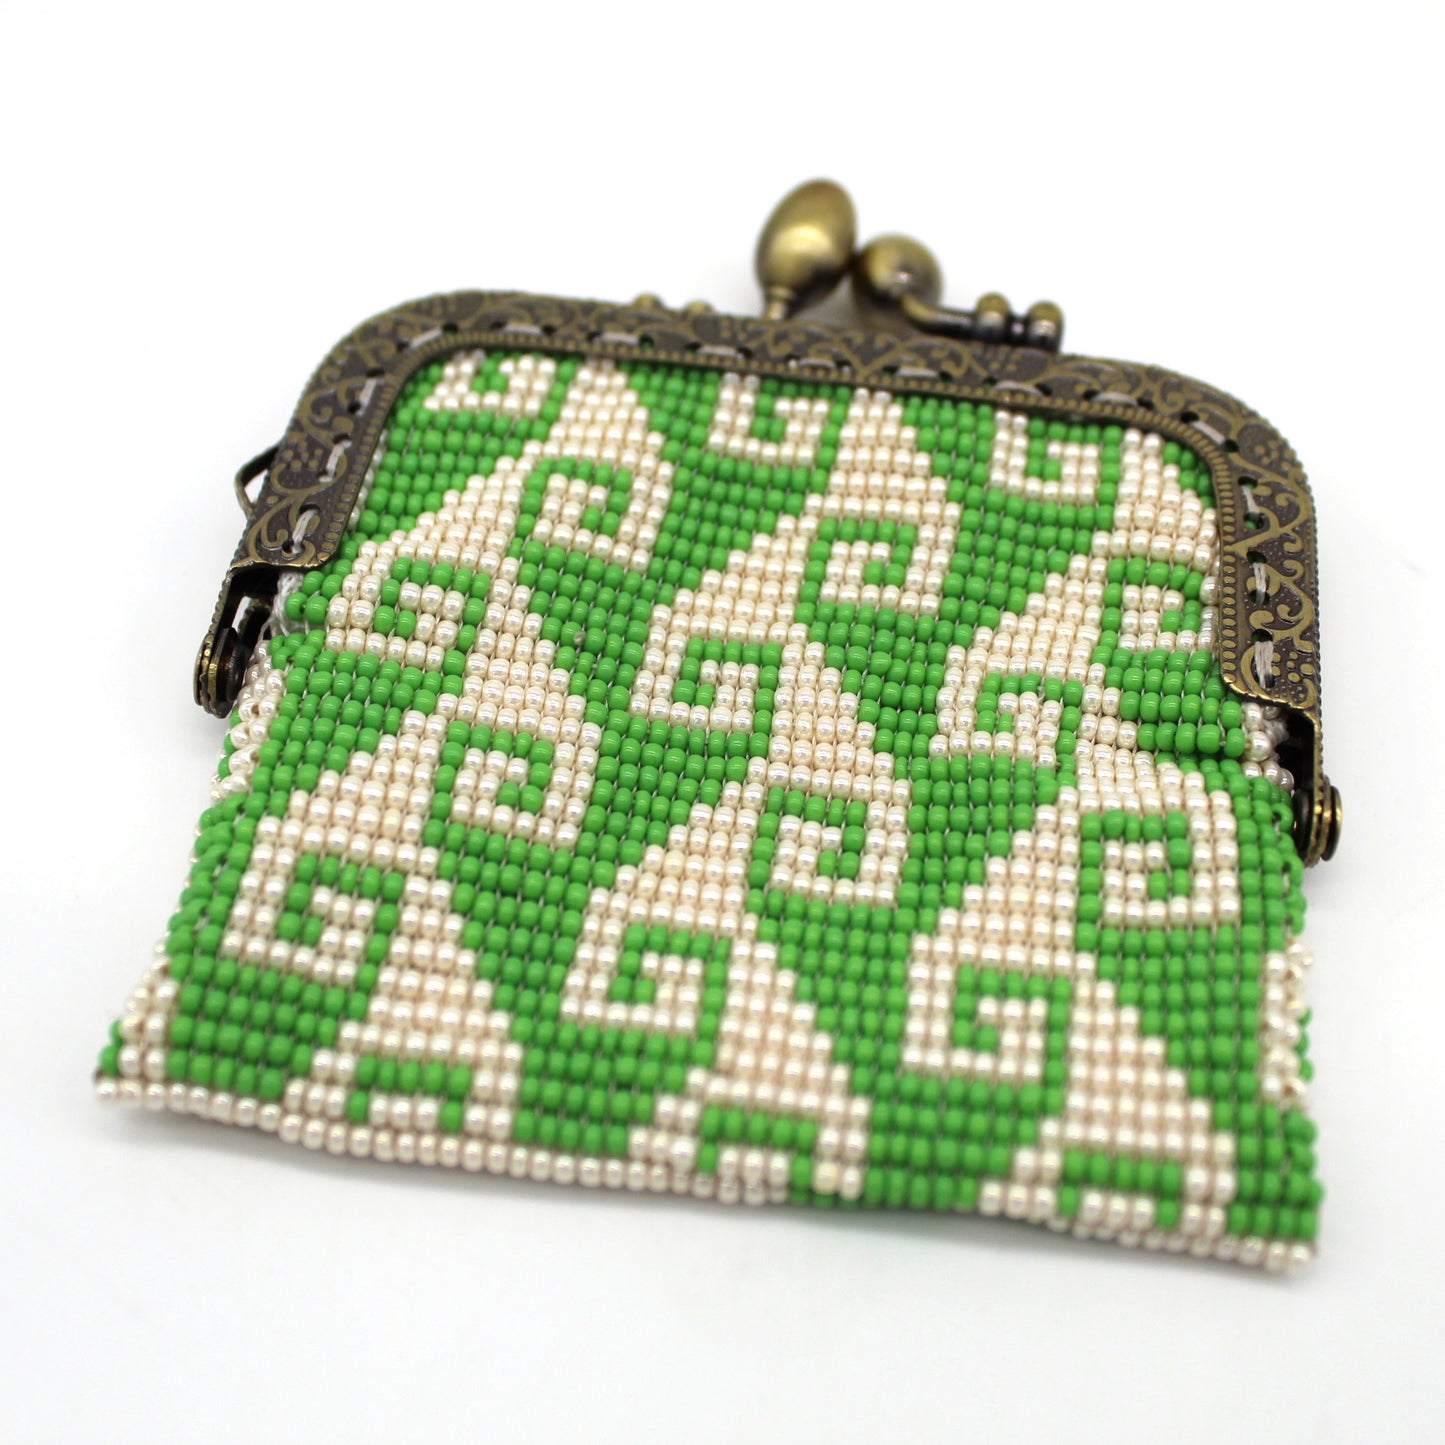 Glass bead coin purse with metal frame - Storm Green